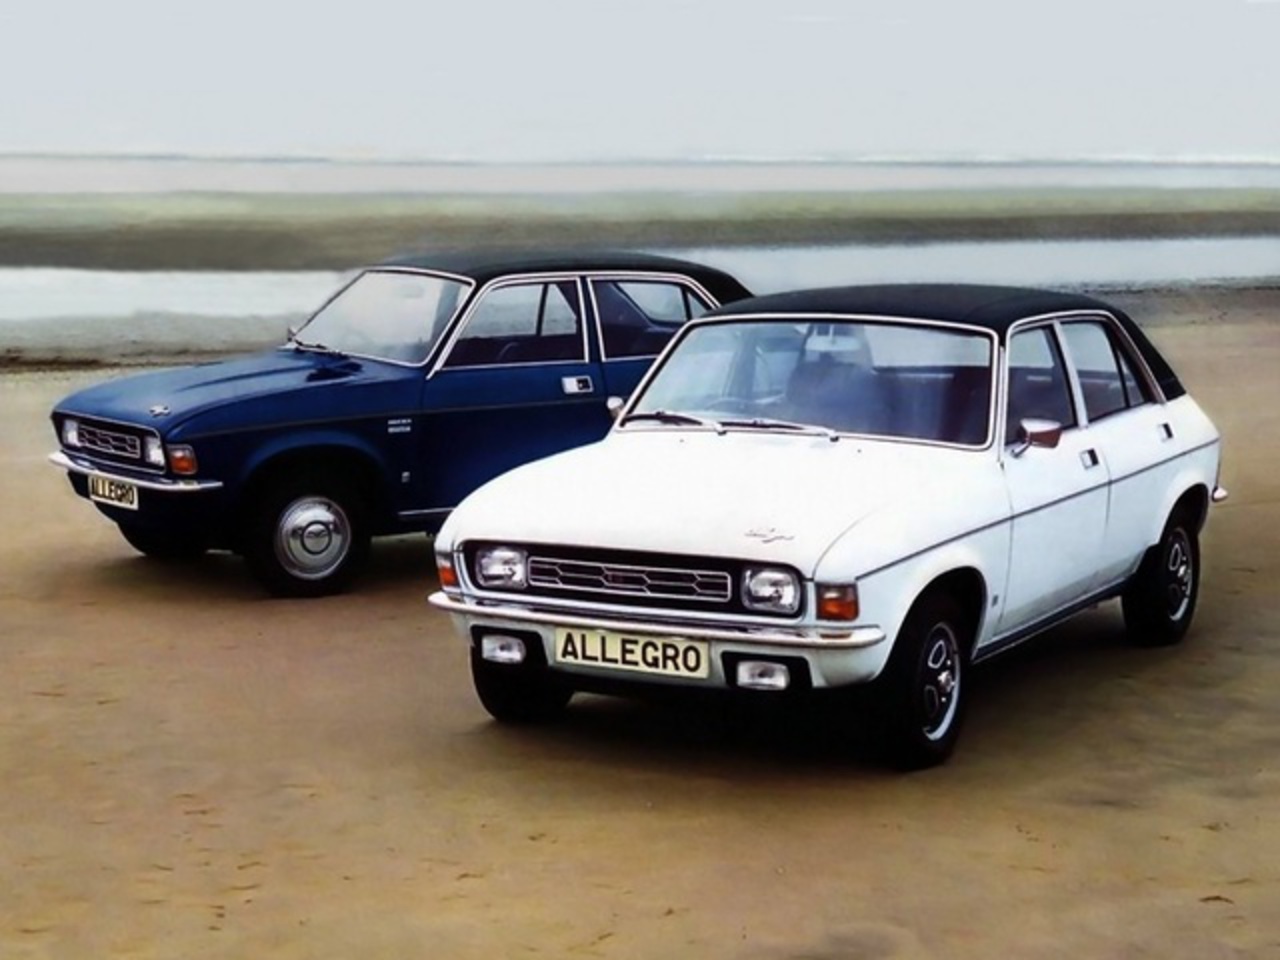 Archive : Motoring â€“ Austin Allegro offers comfort and economy ...